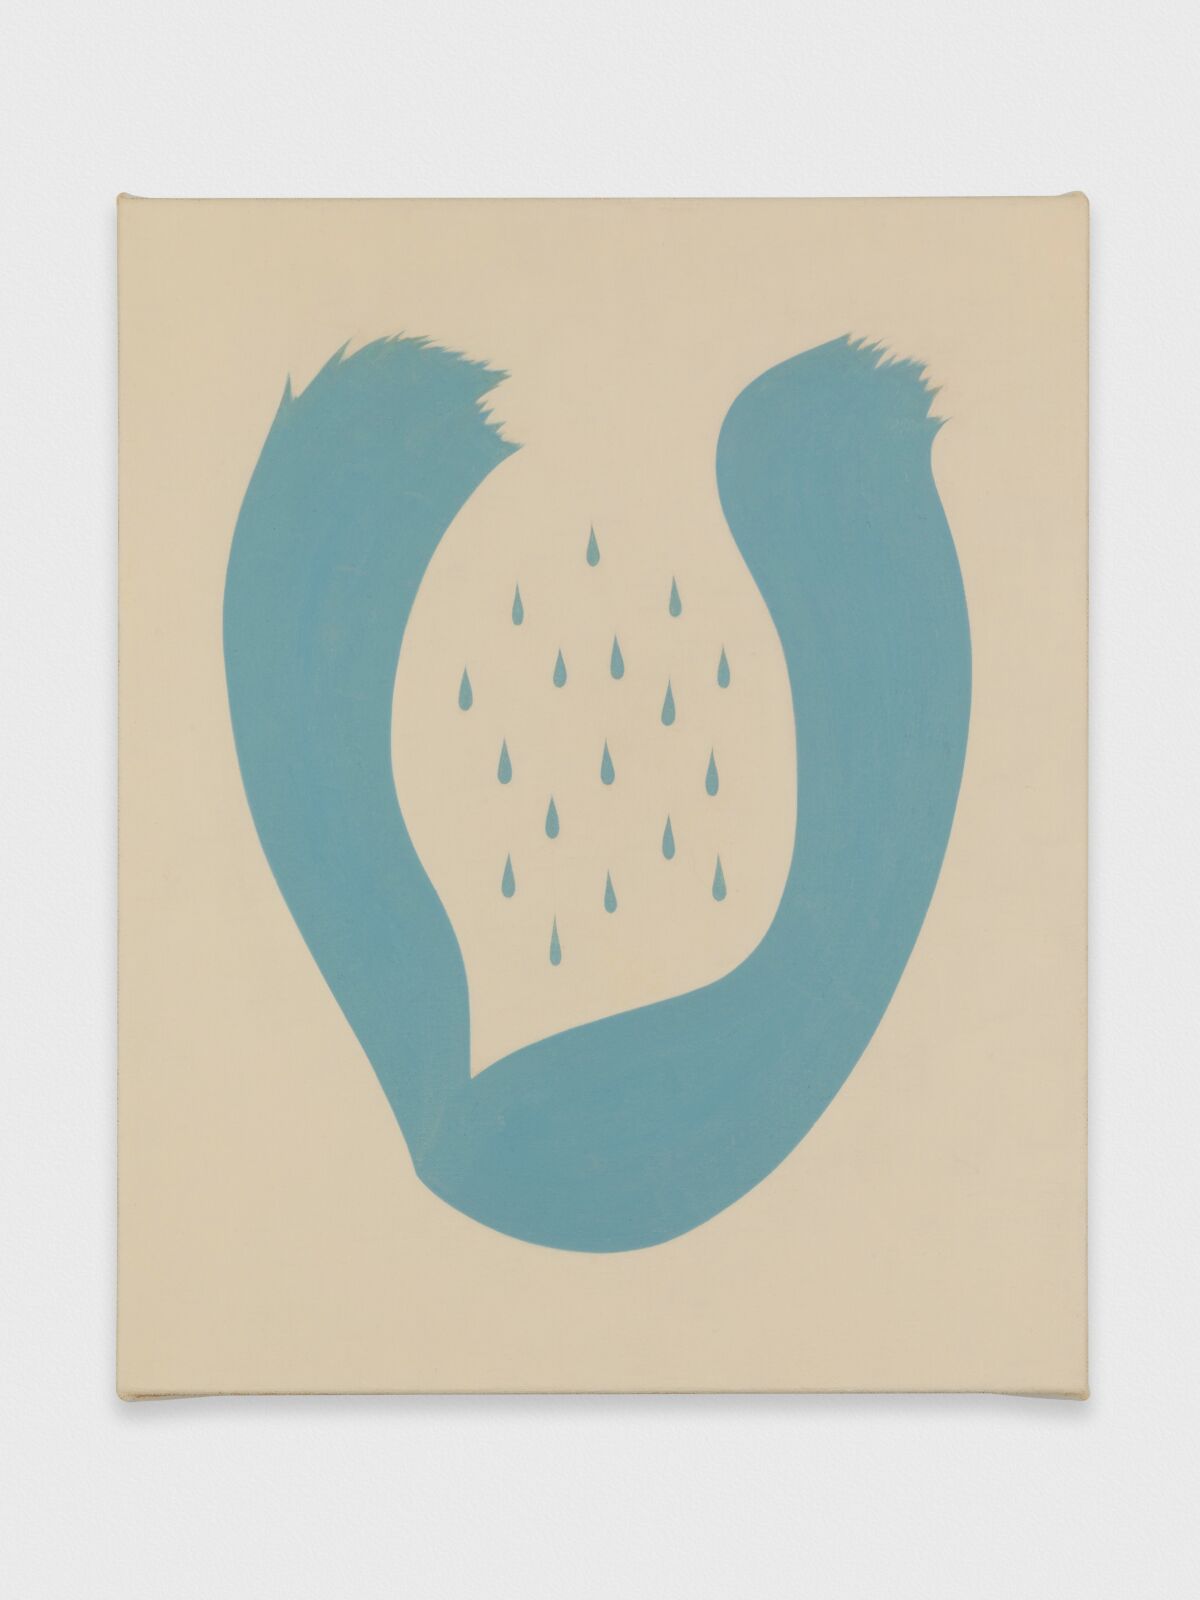 “Toll" by Alice Tippit, 2019. Oil on canvas, 16 inches by 13 inches.